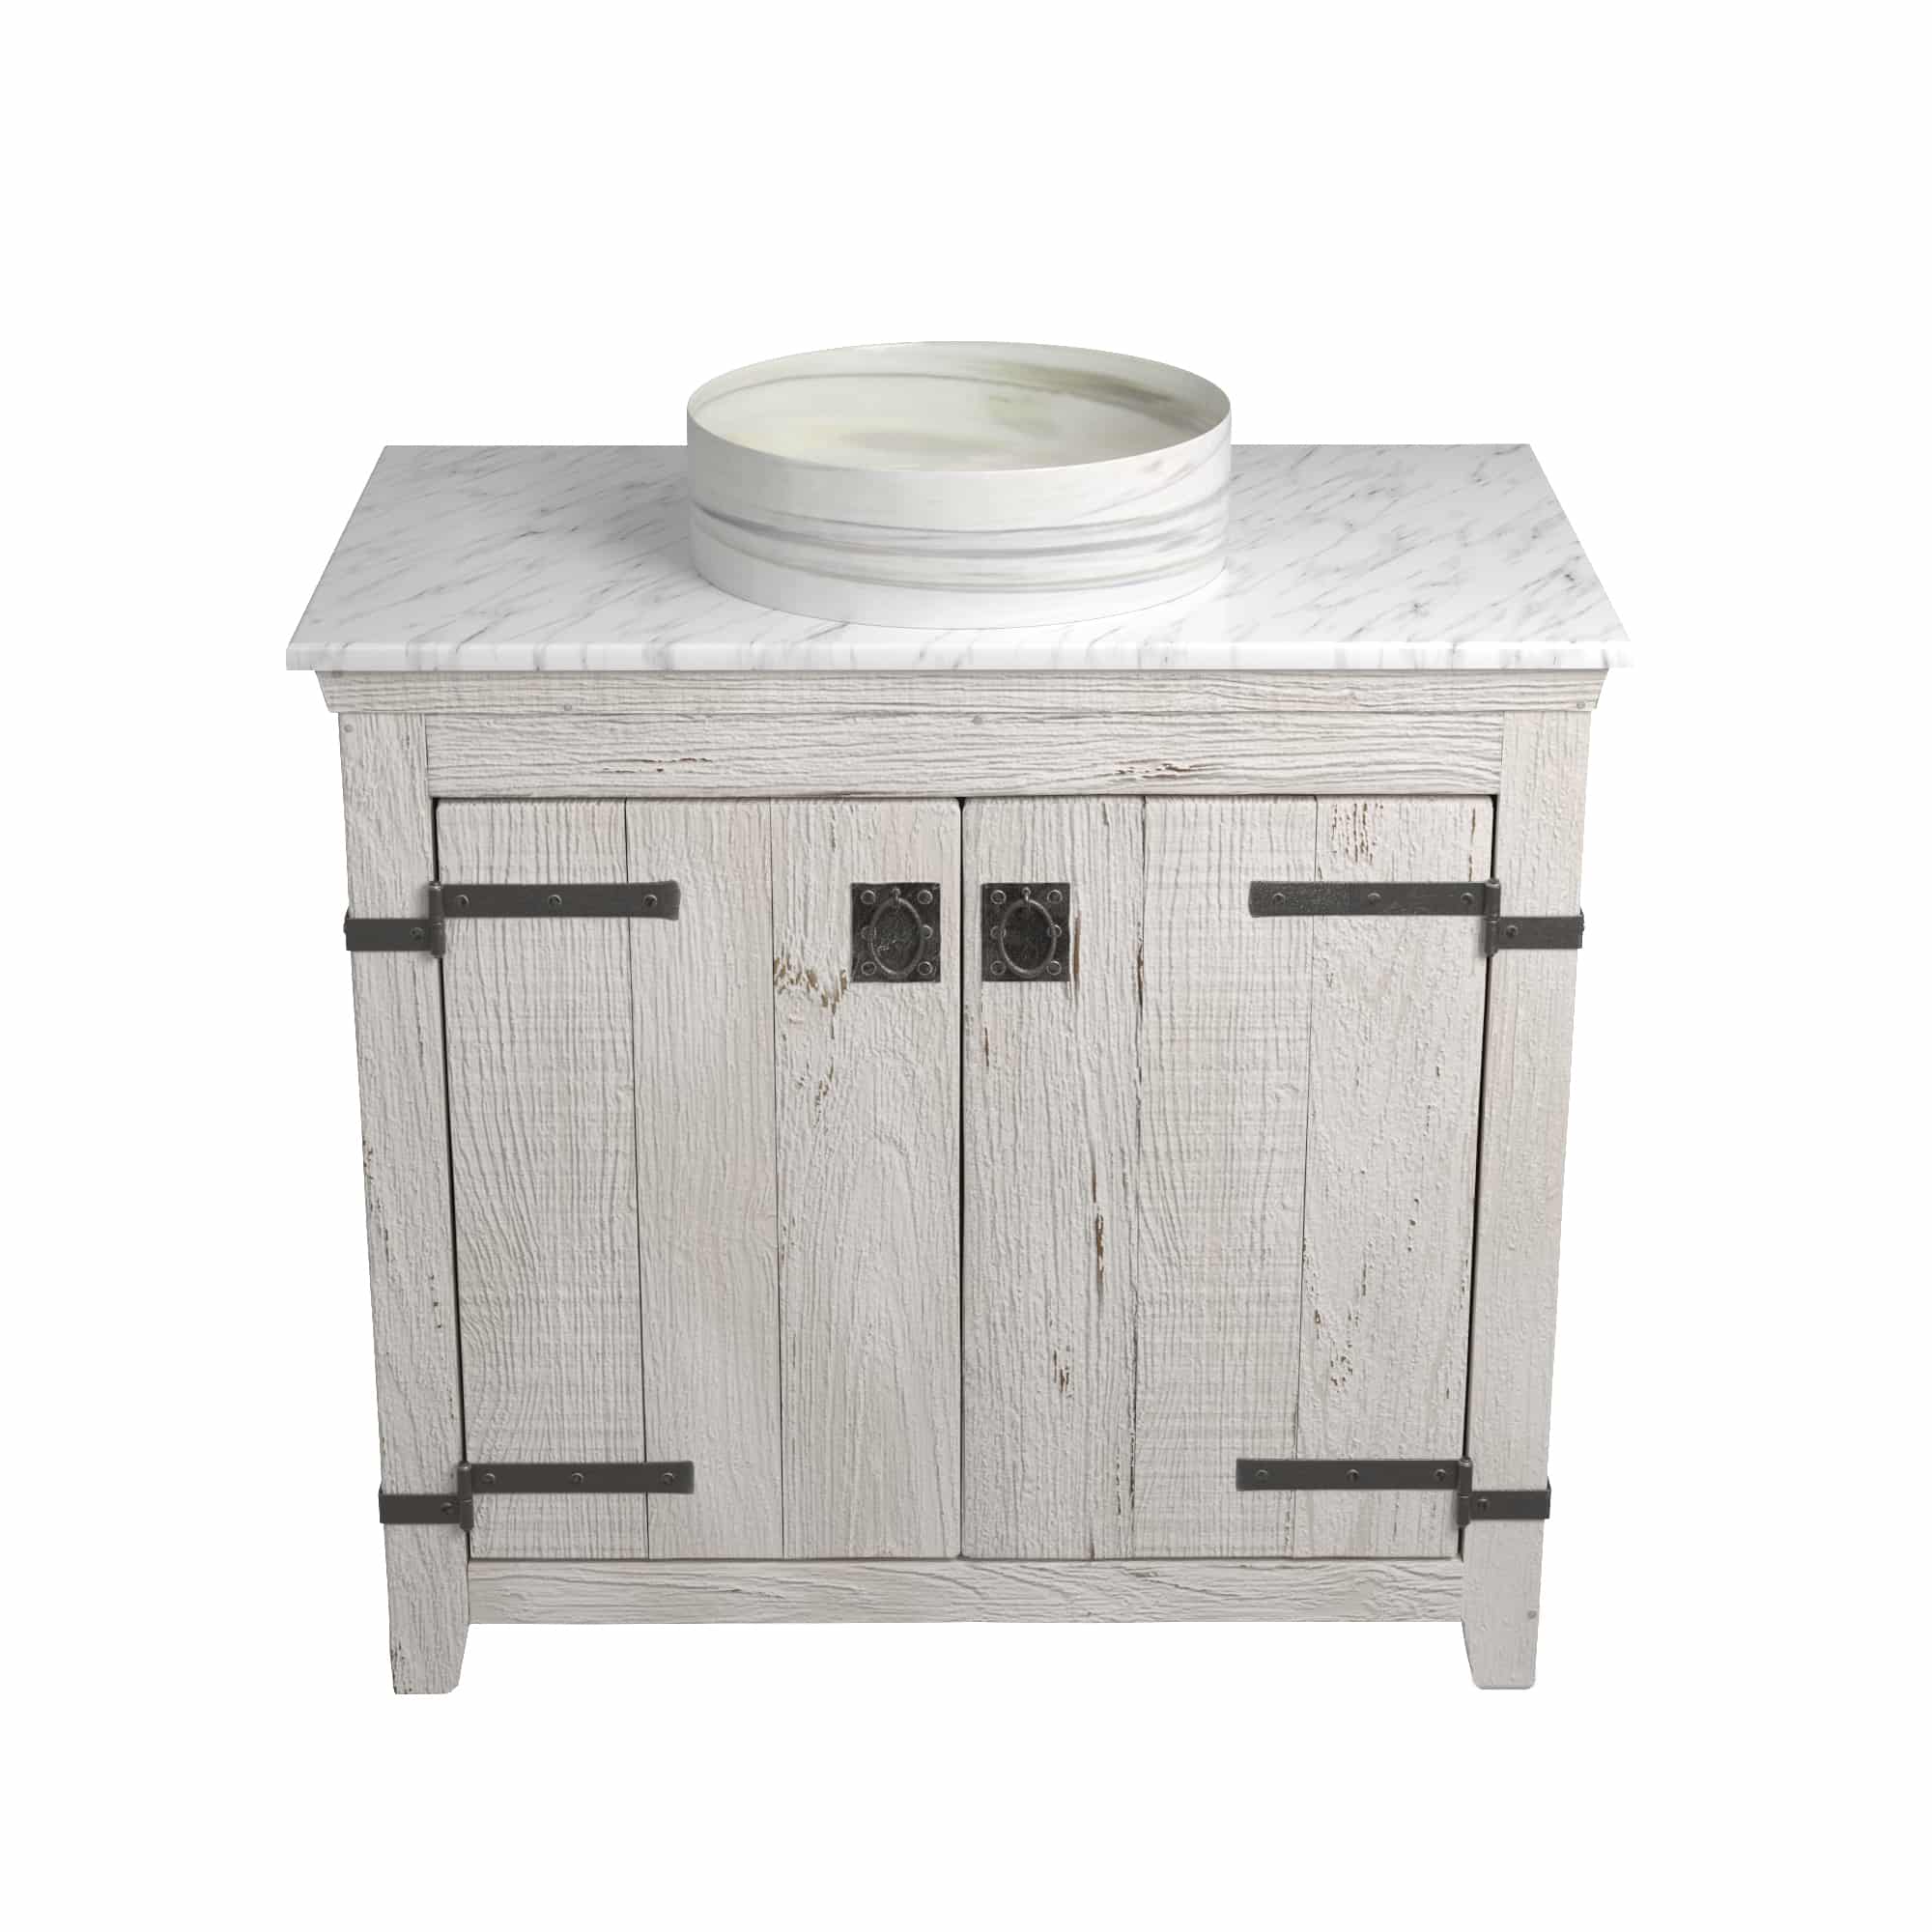 Native Trails 36" Americana Vanity in Whitewash with Carrara Marble Top and Positano in Abalone, No Faucet Hole, BND36-VB-CT-MG-034